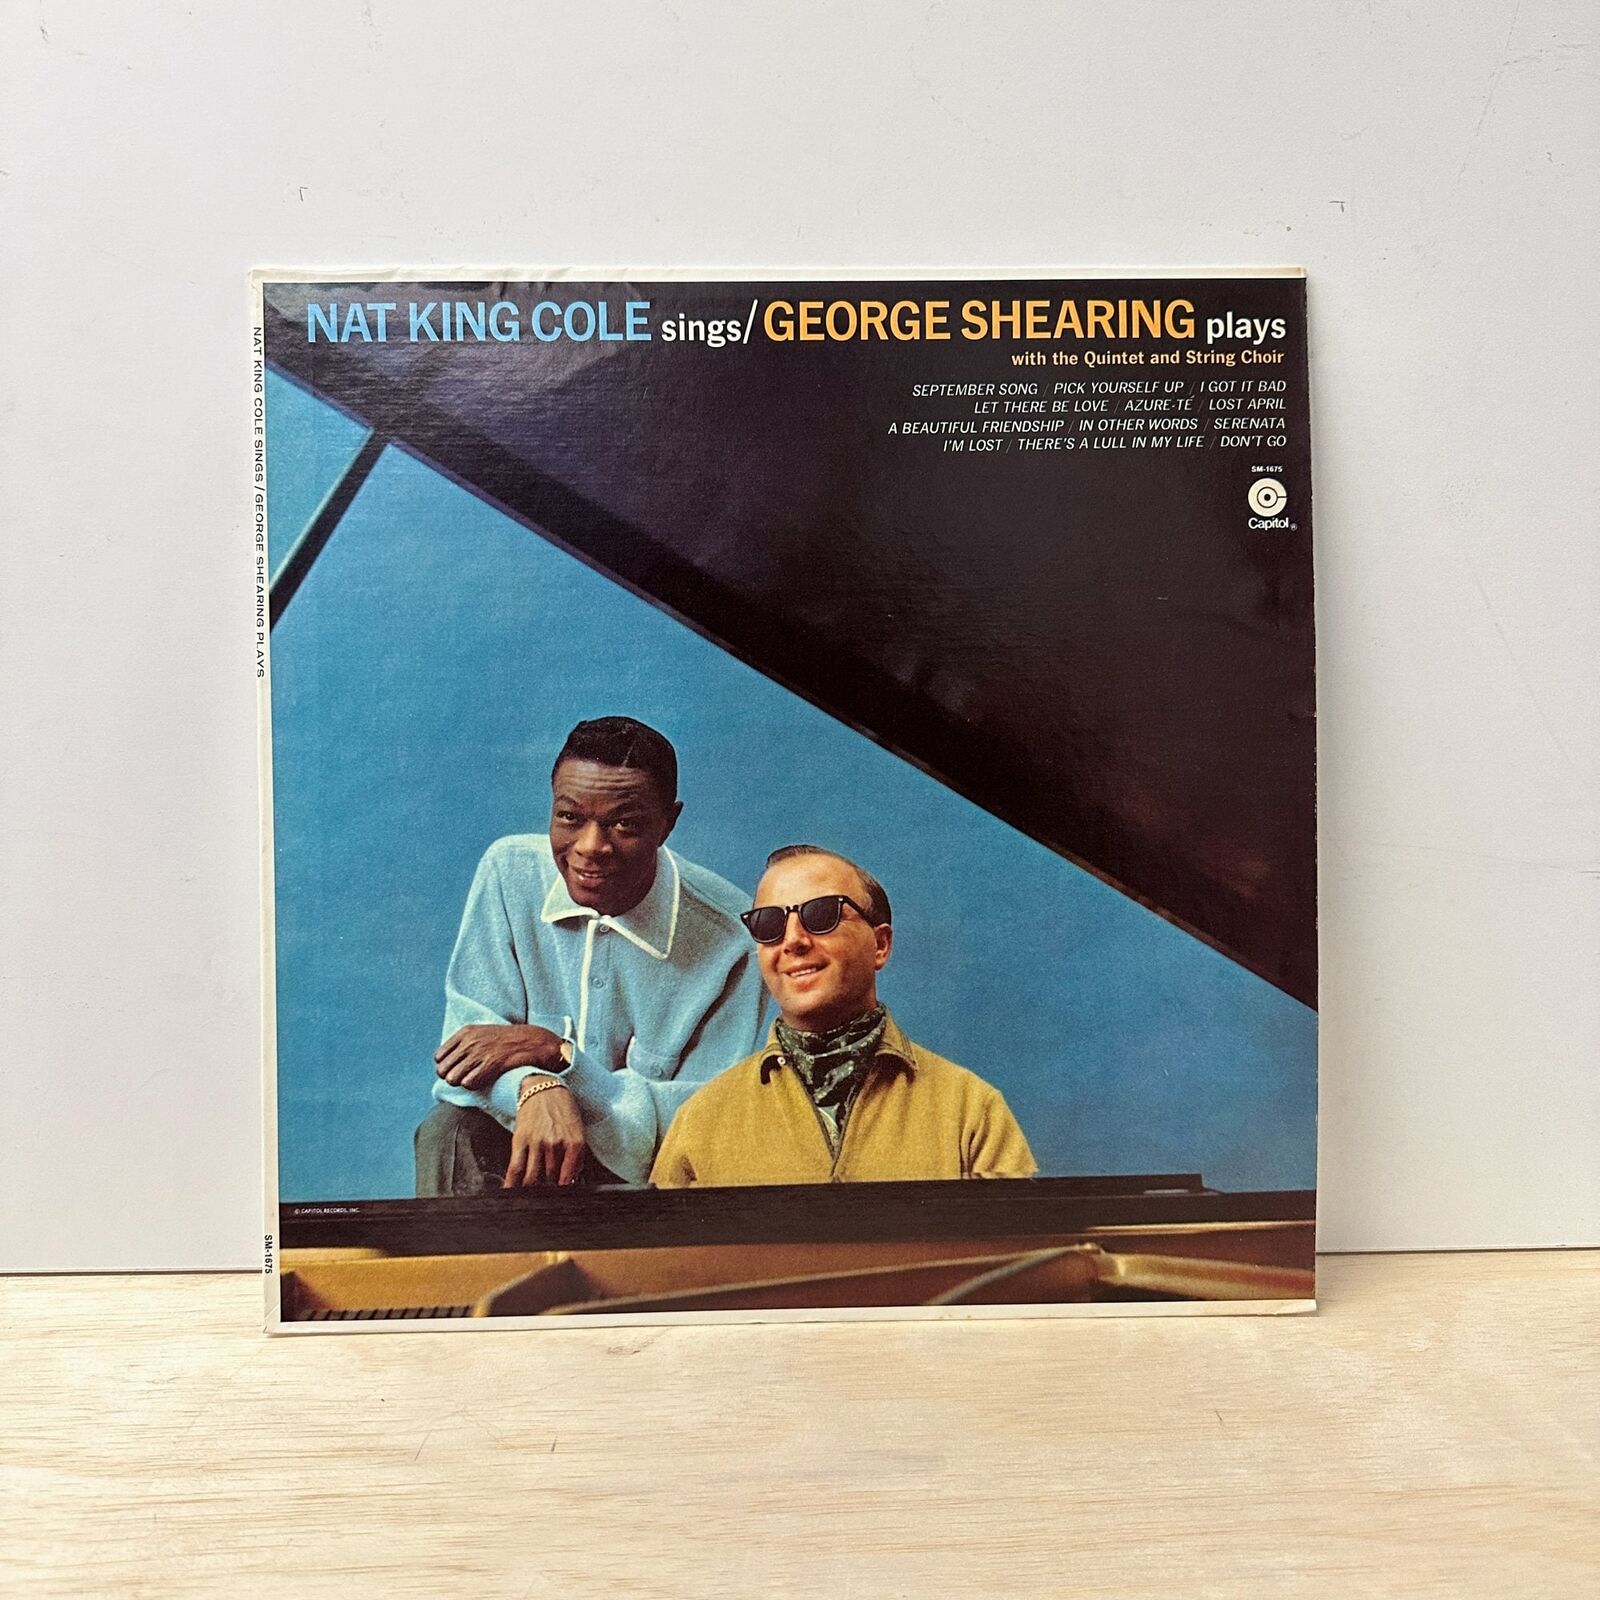 Nat King Cole & George Shearing - Nat King Cole Sings / George Shearing Plays -